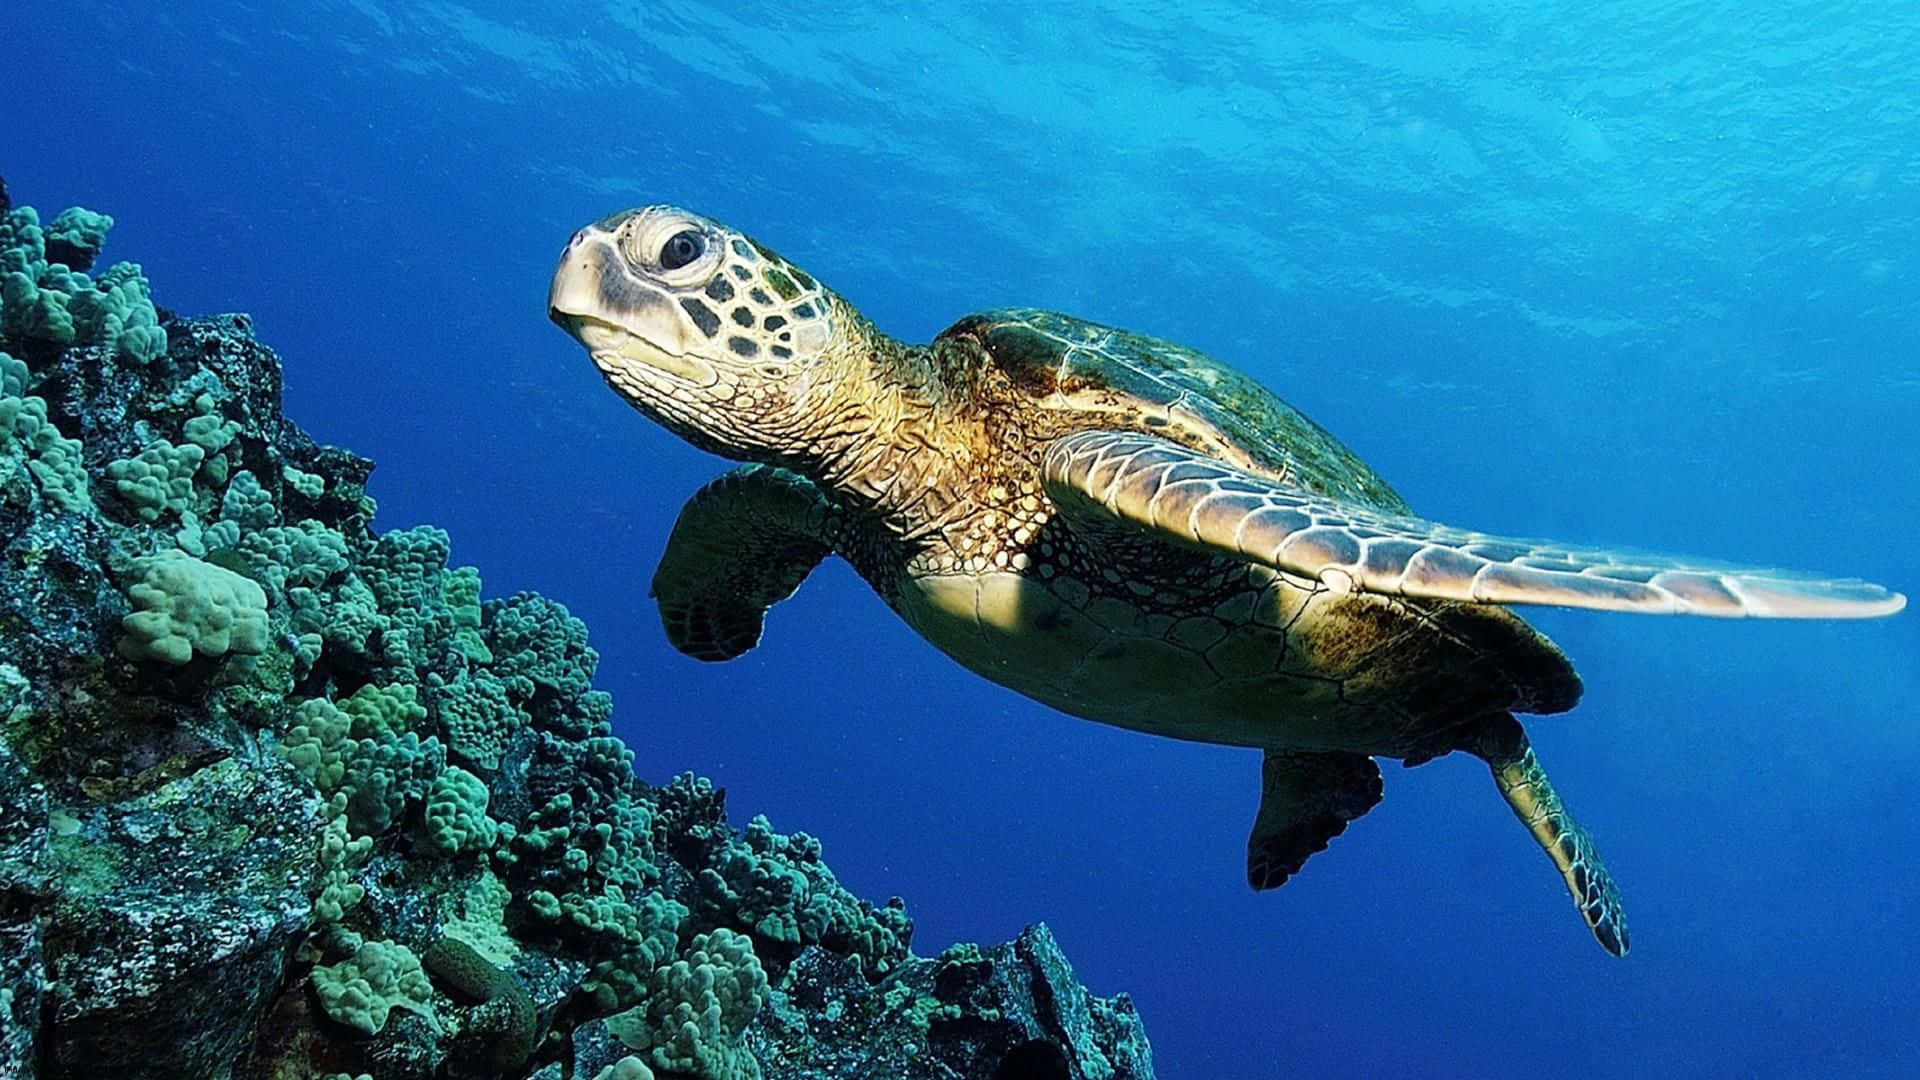 A Green Sea Turtle Swimming Over Coral Reefs